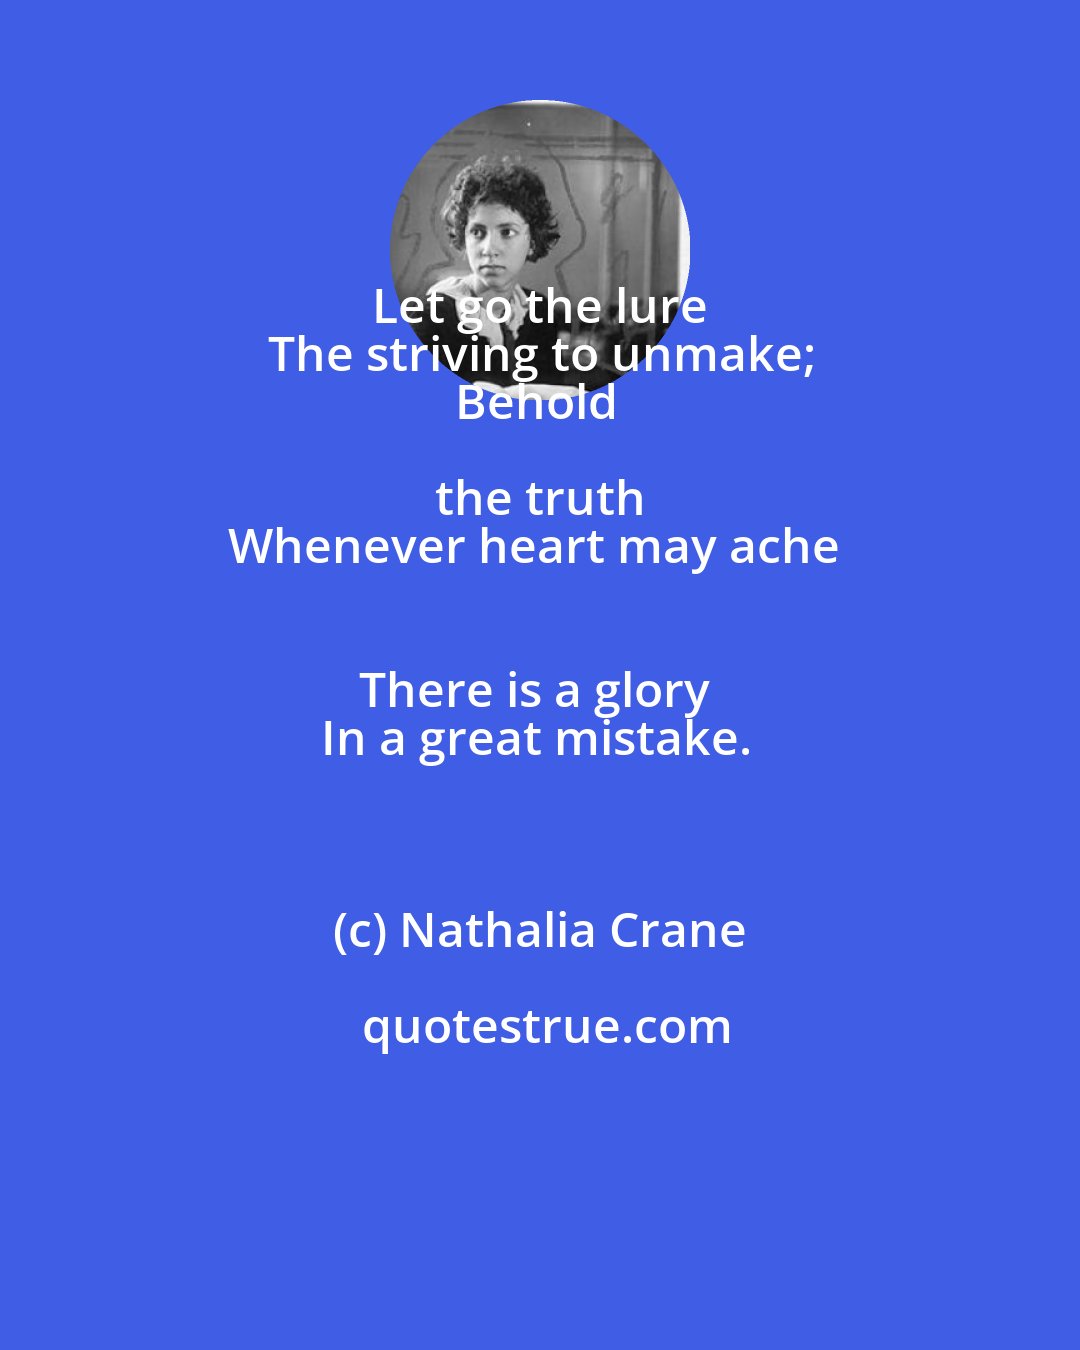 Nathalia Crane: Let go the lure 
The striving to unmake;
Behold the truth 
Whenever heart may ache 
There is a glory 
In a great mistake.